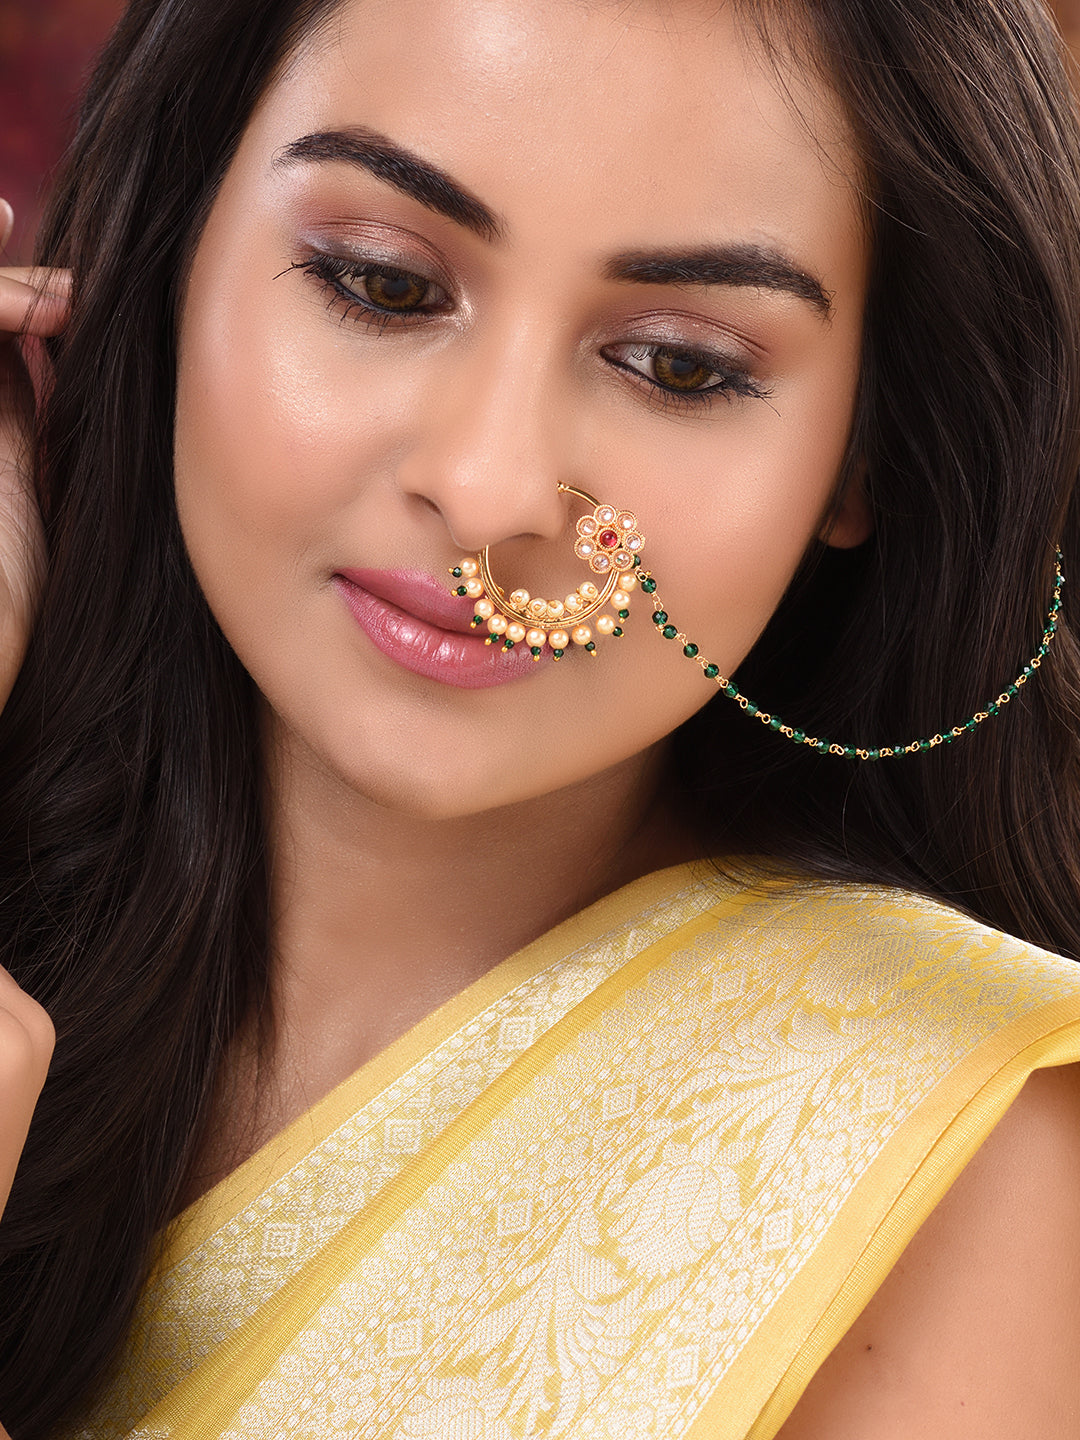 Gold Plated Studded & Beaded Floral Nose Ring Chain, zaveri pearls, sale price rs, sale price, sale gold plated, sale gold, sale, rubans, ring, regular price, priyassi jewellery, kushal's - S